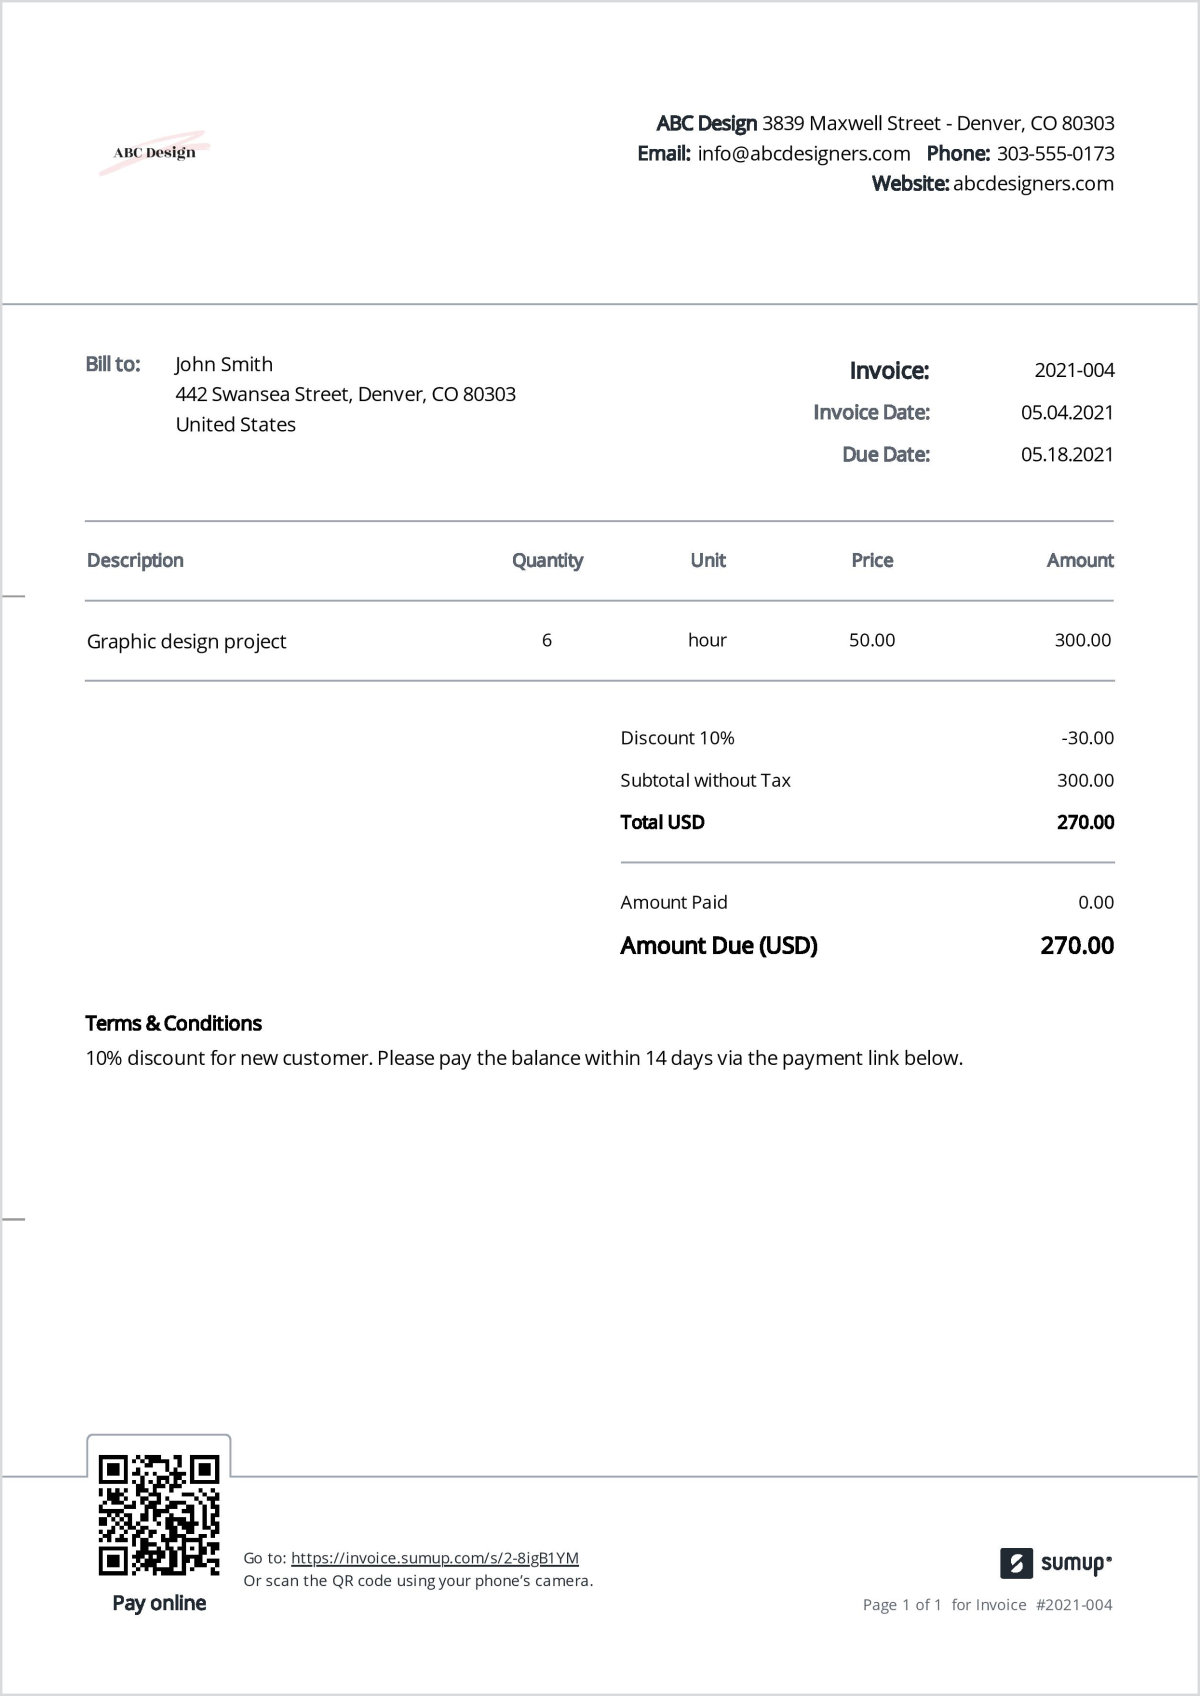 how-to-apply-a-discount-to-an-invoice-sumup-invoices